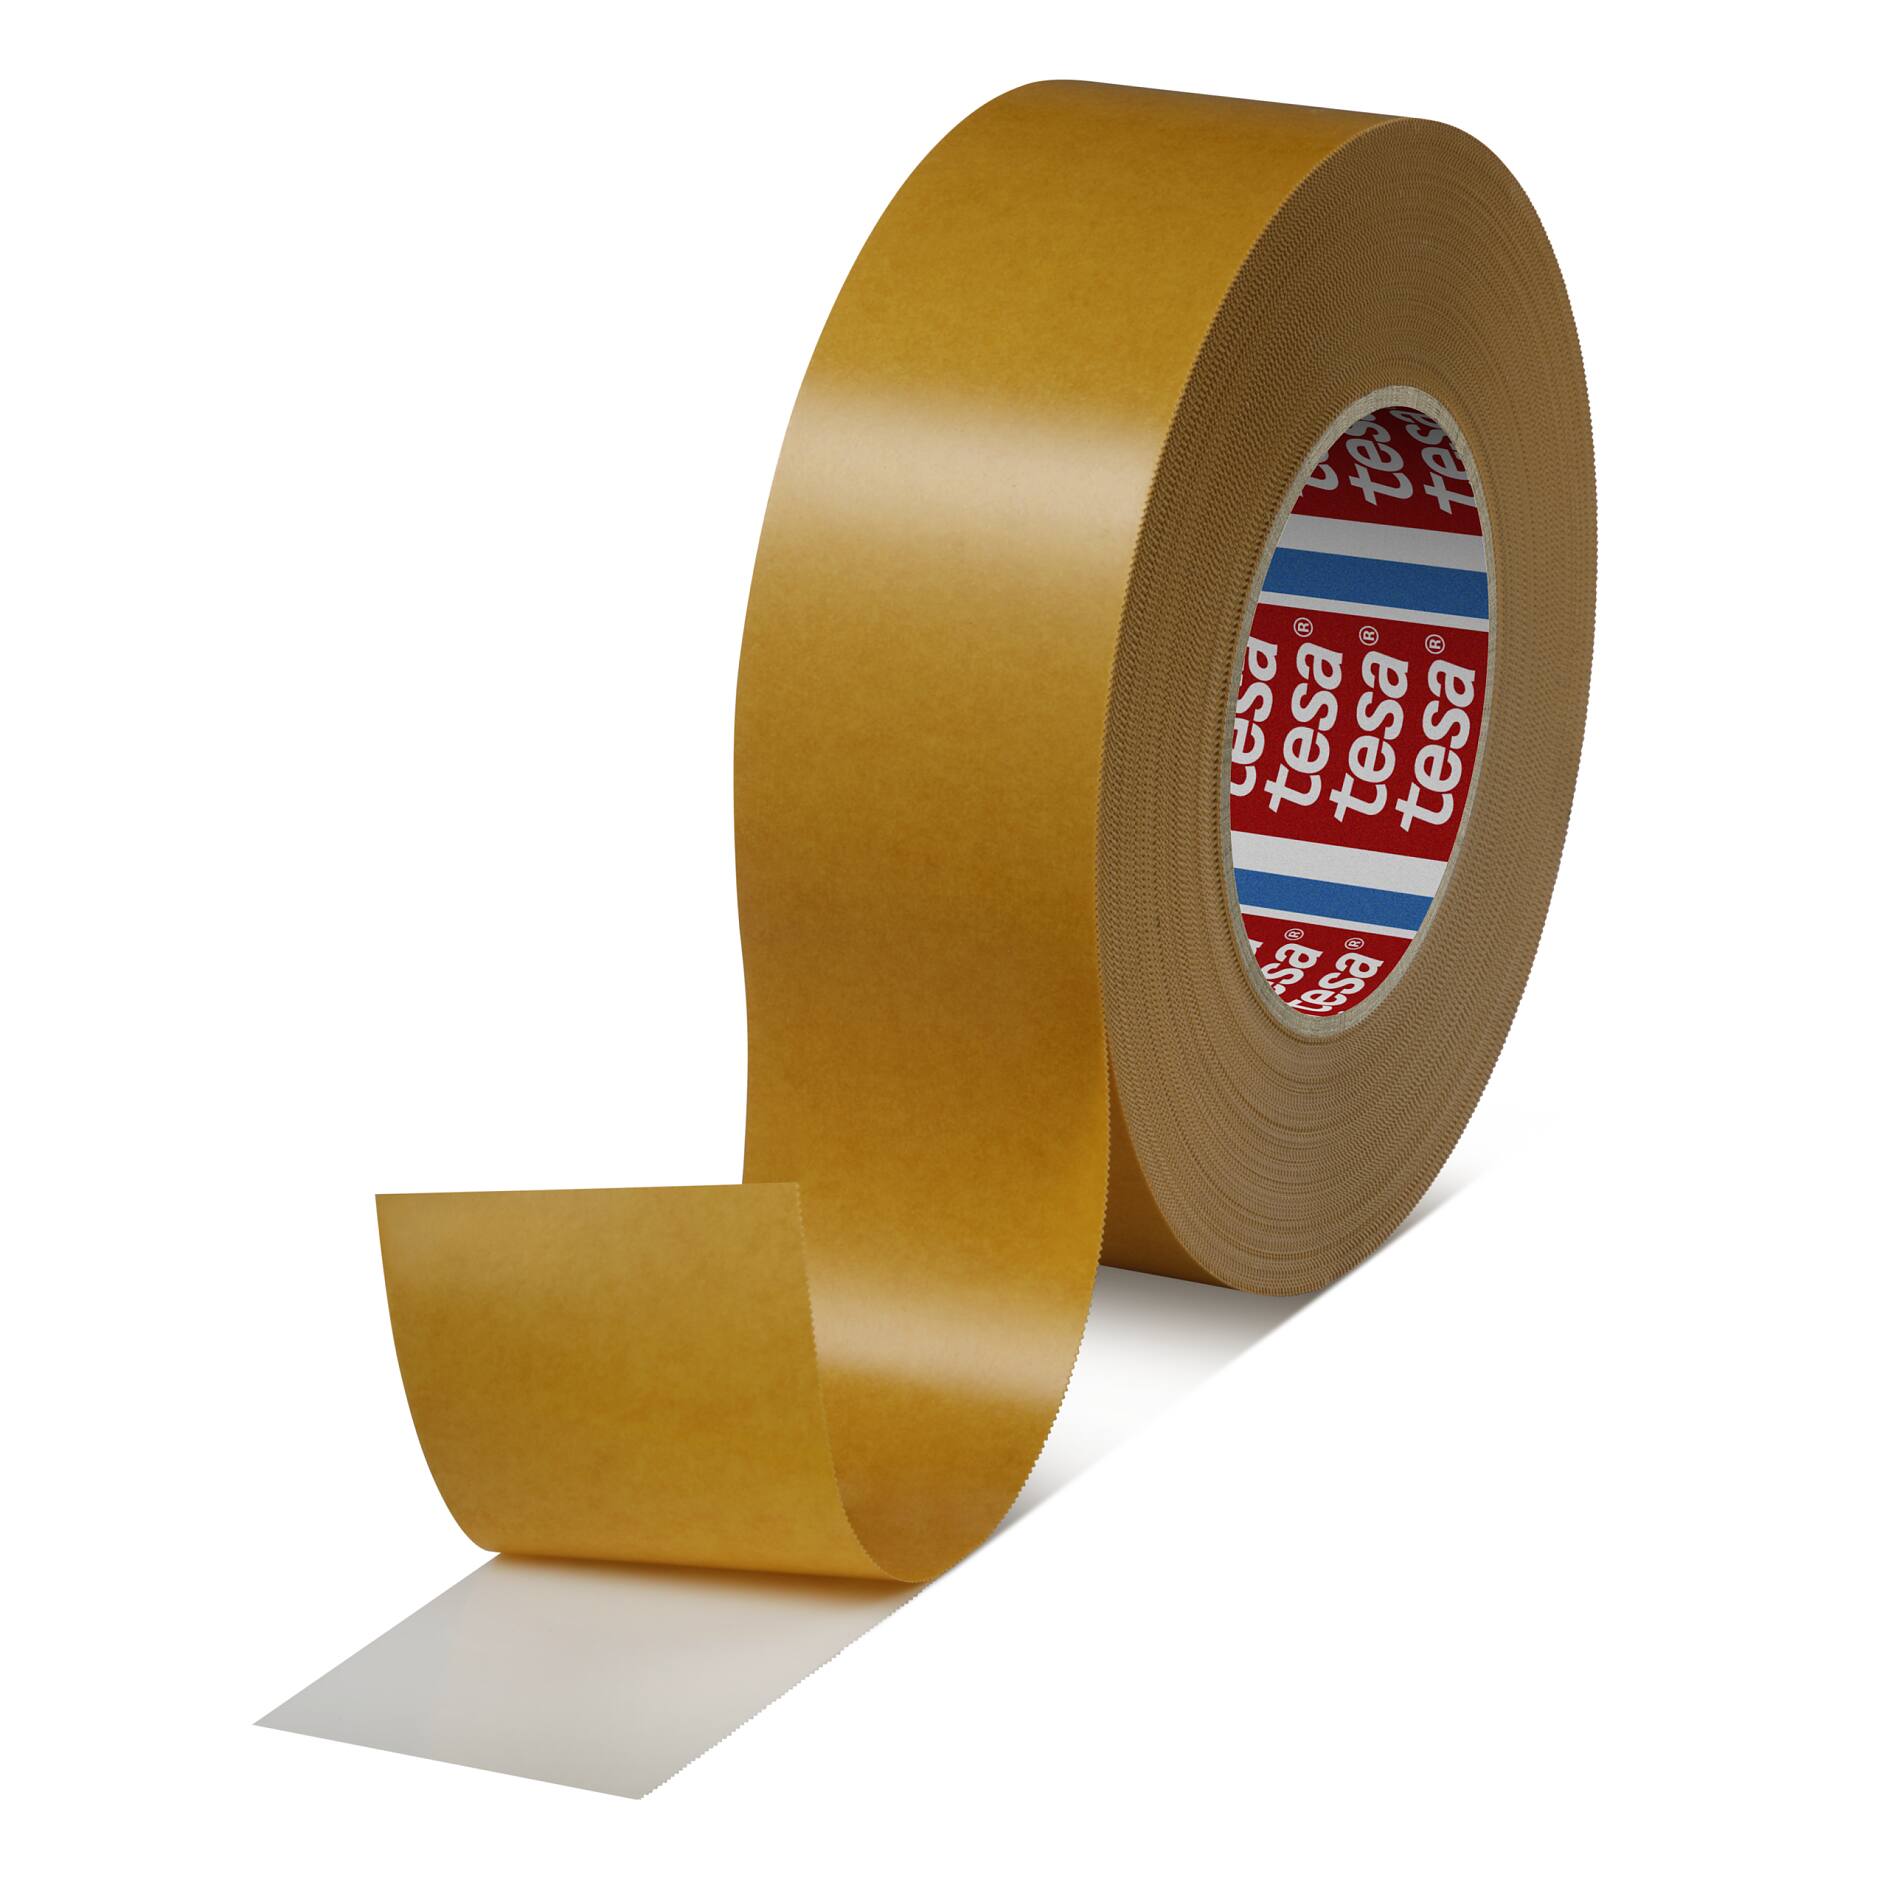 Tesa 4970 Double Sided White PVC Tape 3 x 55M with High Adhesion